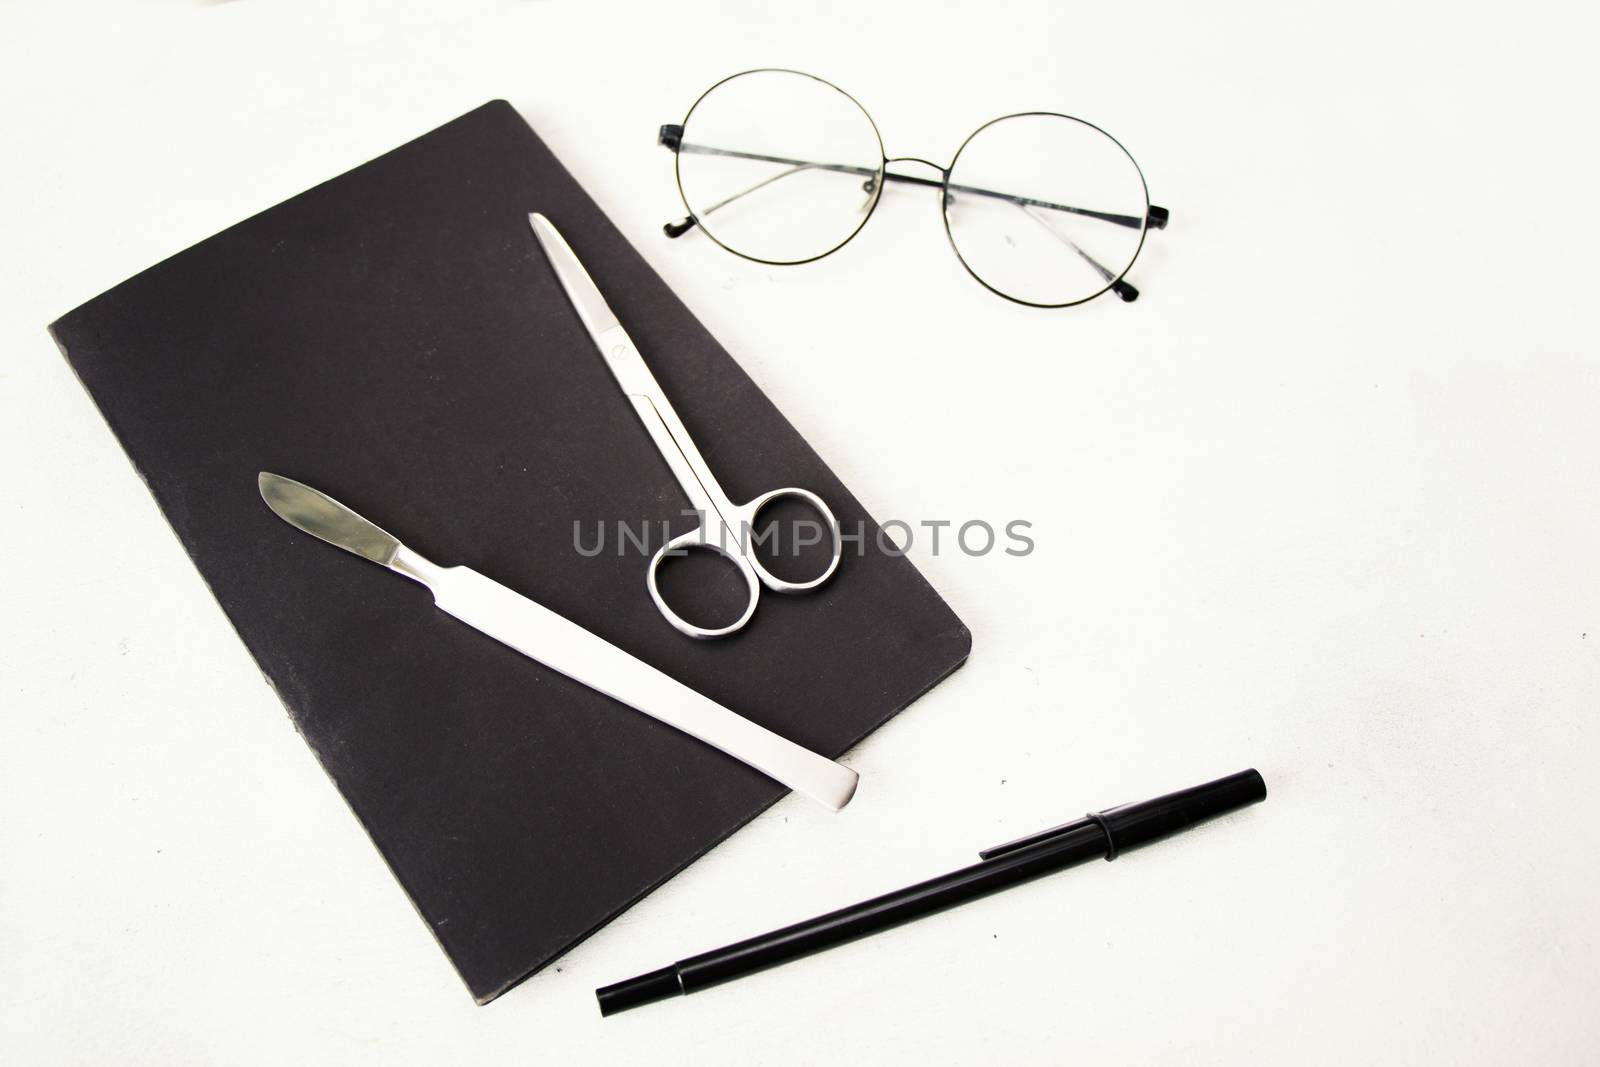 Medical, anatomy, veterinary, biology students stainless steel and notebook with glass and pencil on the white background. Studio shoot.